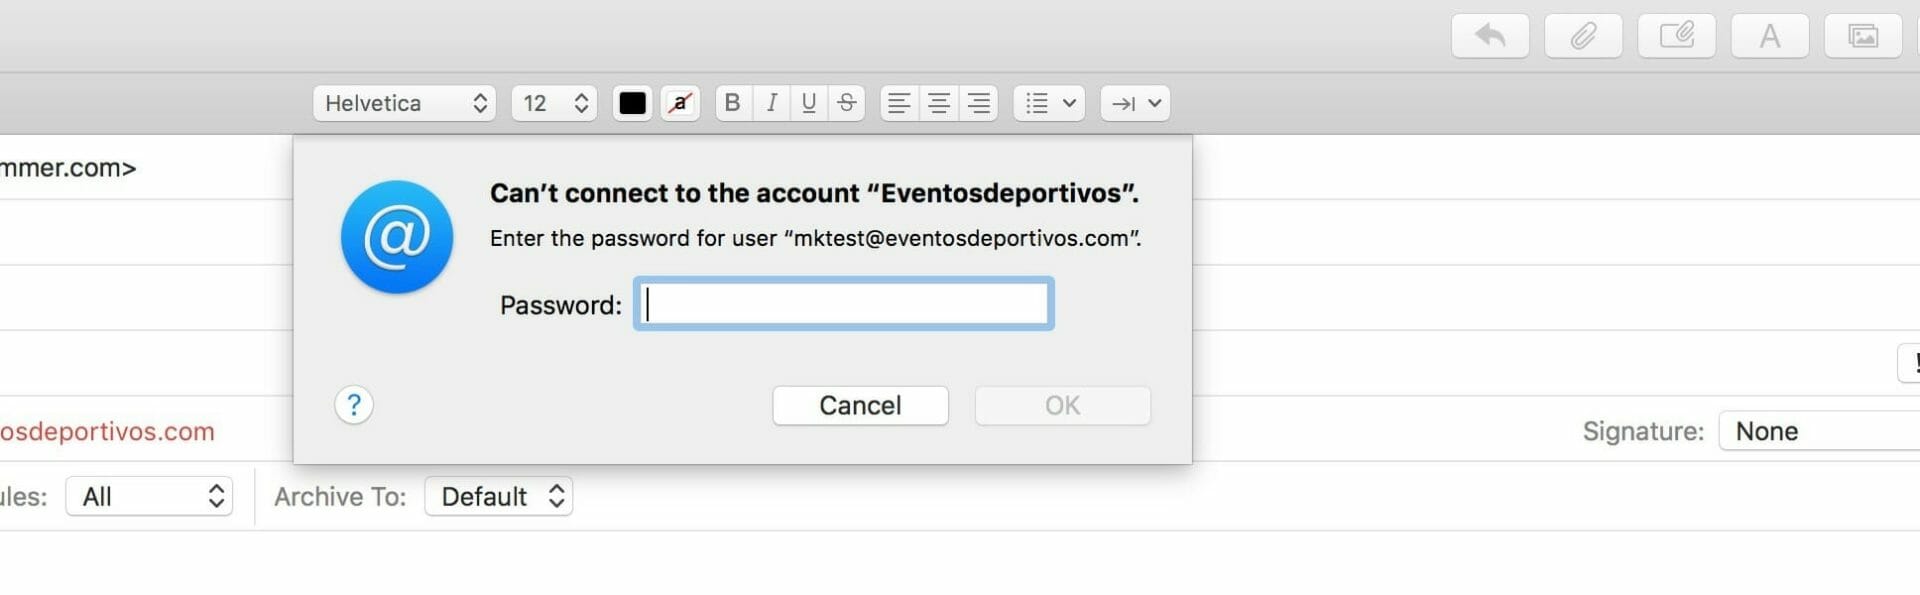 update email password for outlook account in mac